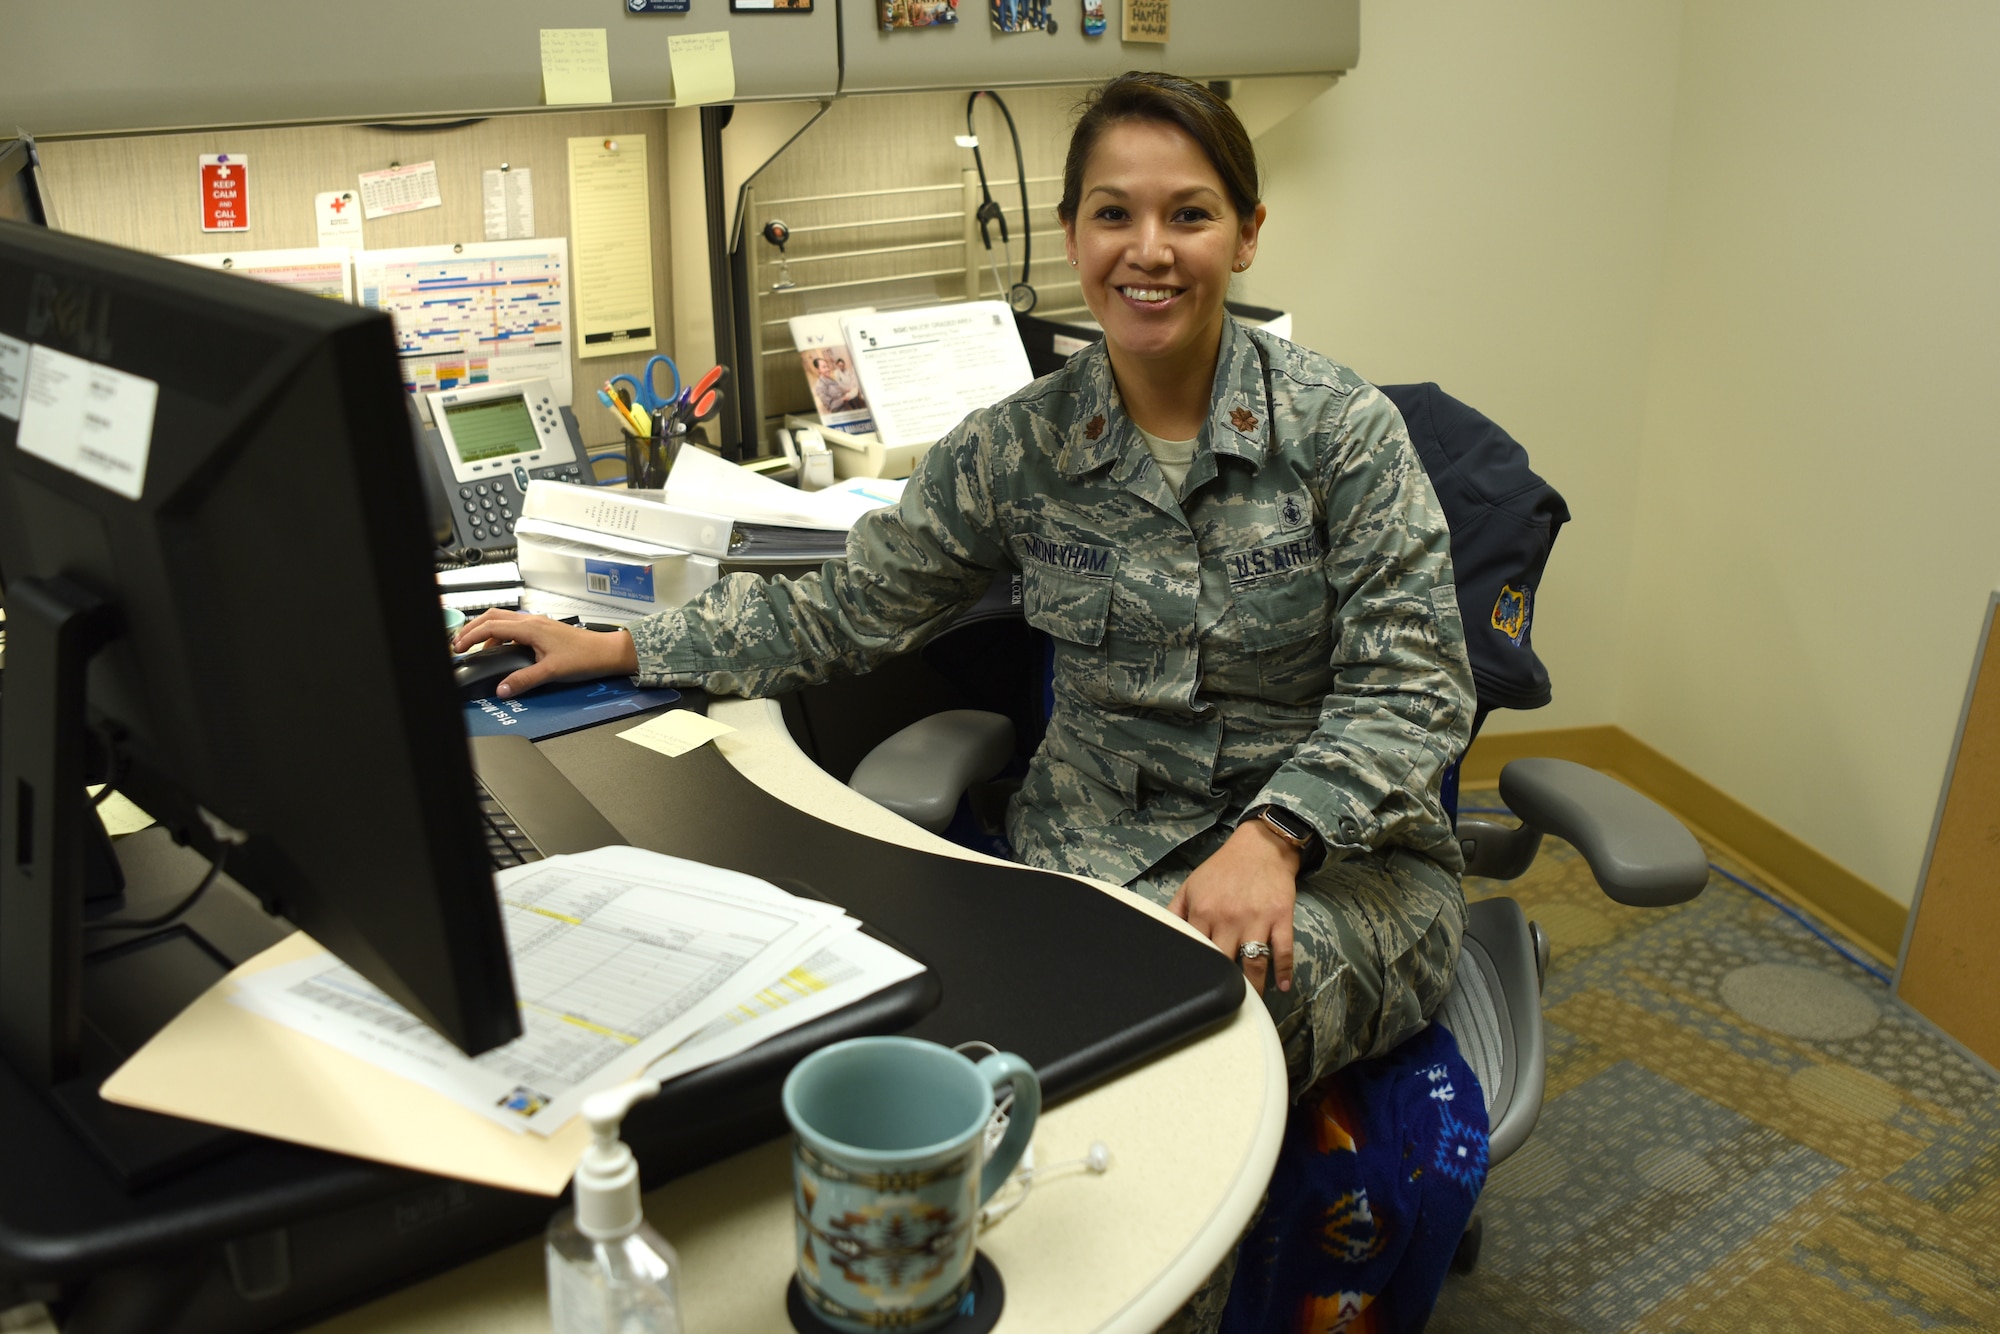 U.S. Air Force Maj. Tanya Mooneyham, 81st Medical Group Intensive Care Unit element leader, poses for a photo inside Keesler Medical Center on Keesler Air Force Base, Mississippi, July 15, 2019. Mooneyham received the 2019 Society of American Indian Government Employees Military Meritorious Service Award for her dedicated work in her community while supporting the Defense Department mission. (U.S. Air Force photo by Senior Airman Suzie Plotnikov)